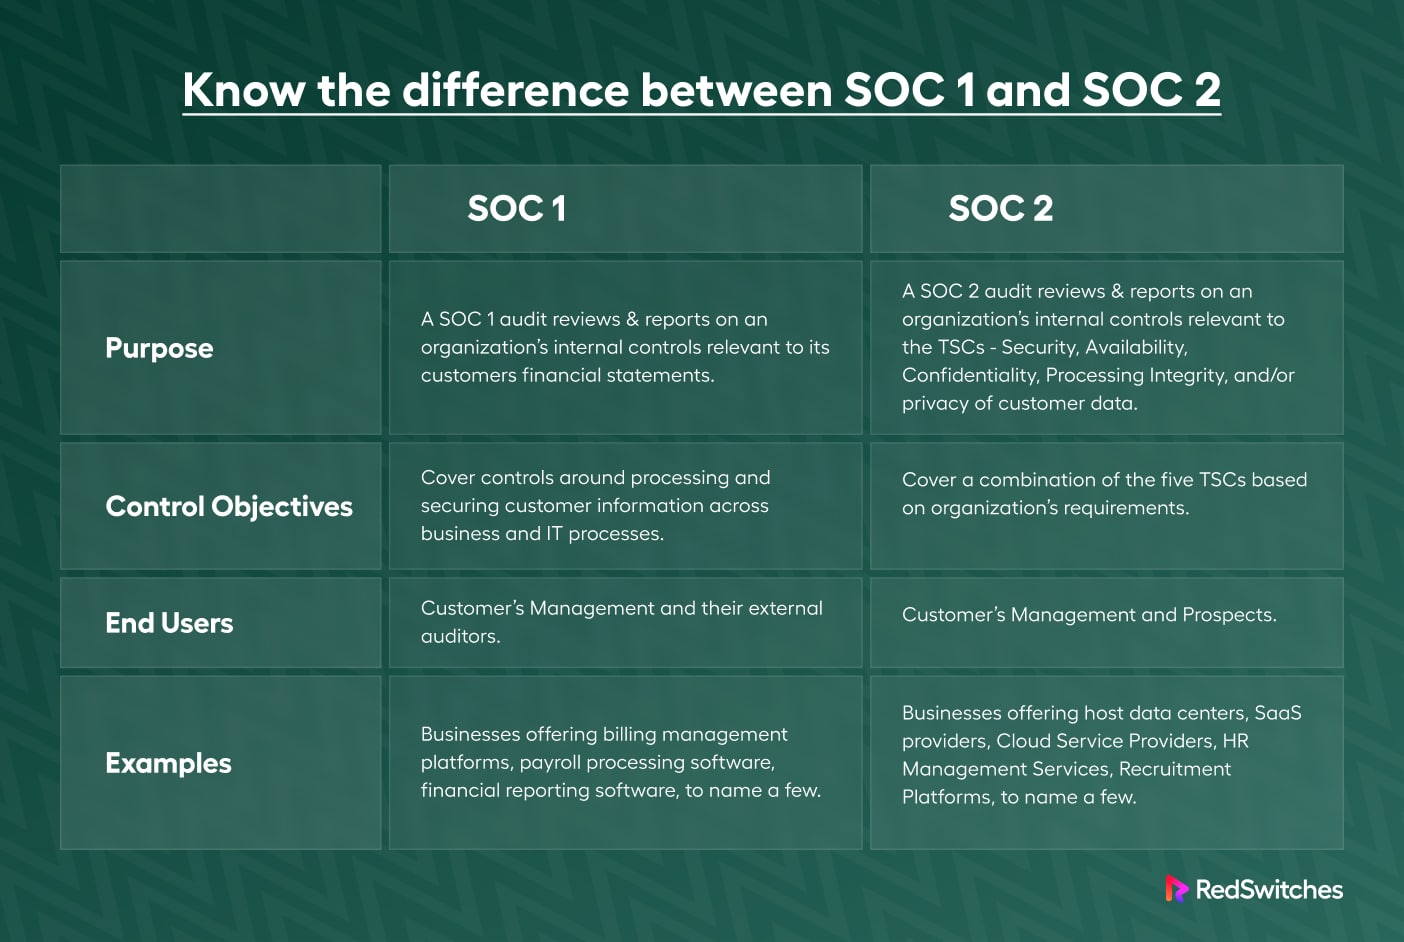 Differences Between SOC 1 and SOC 2